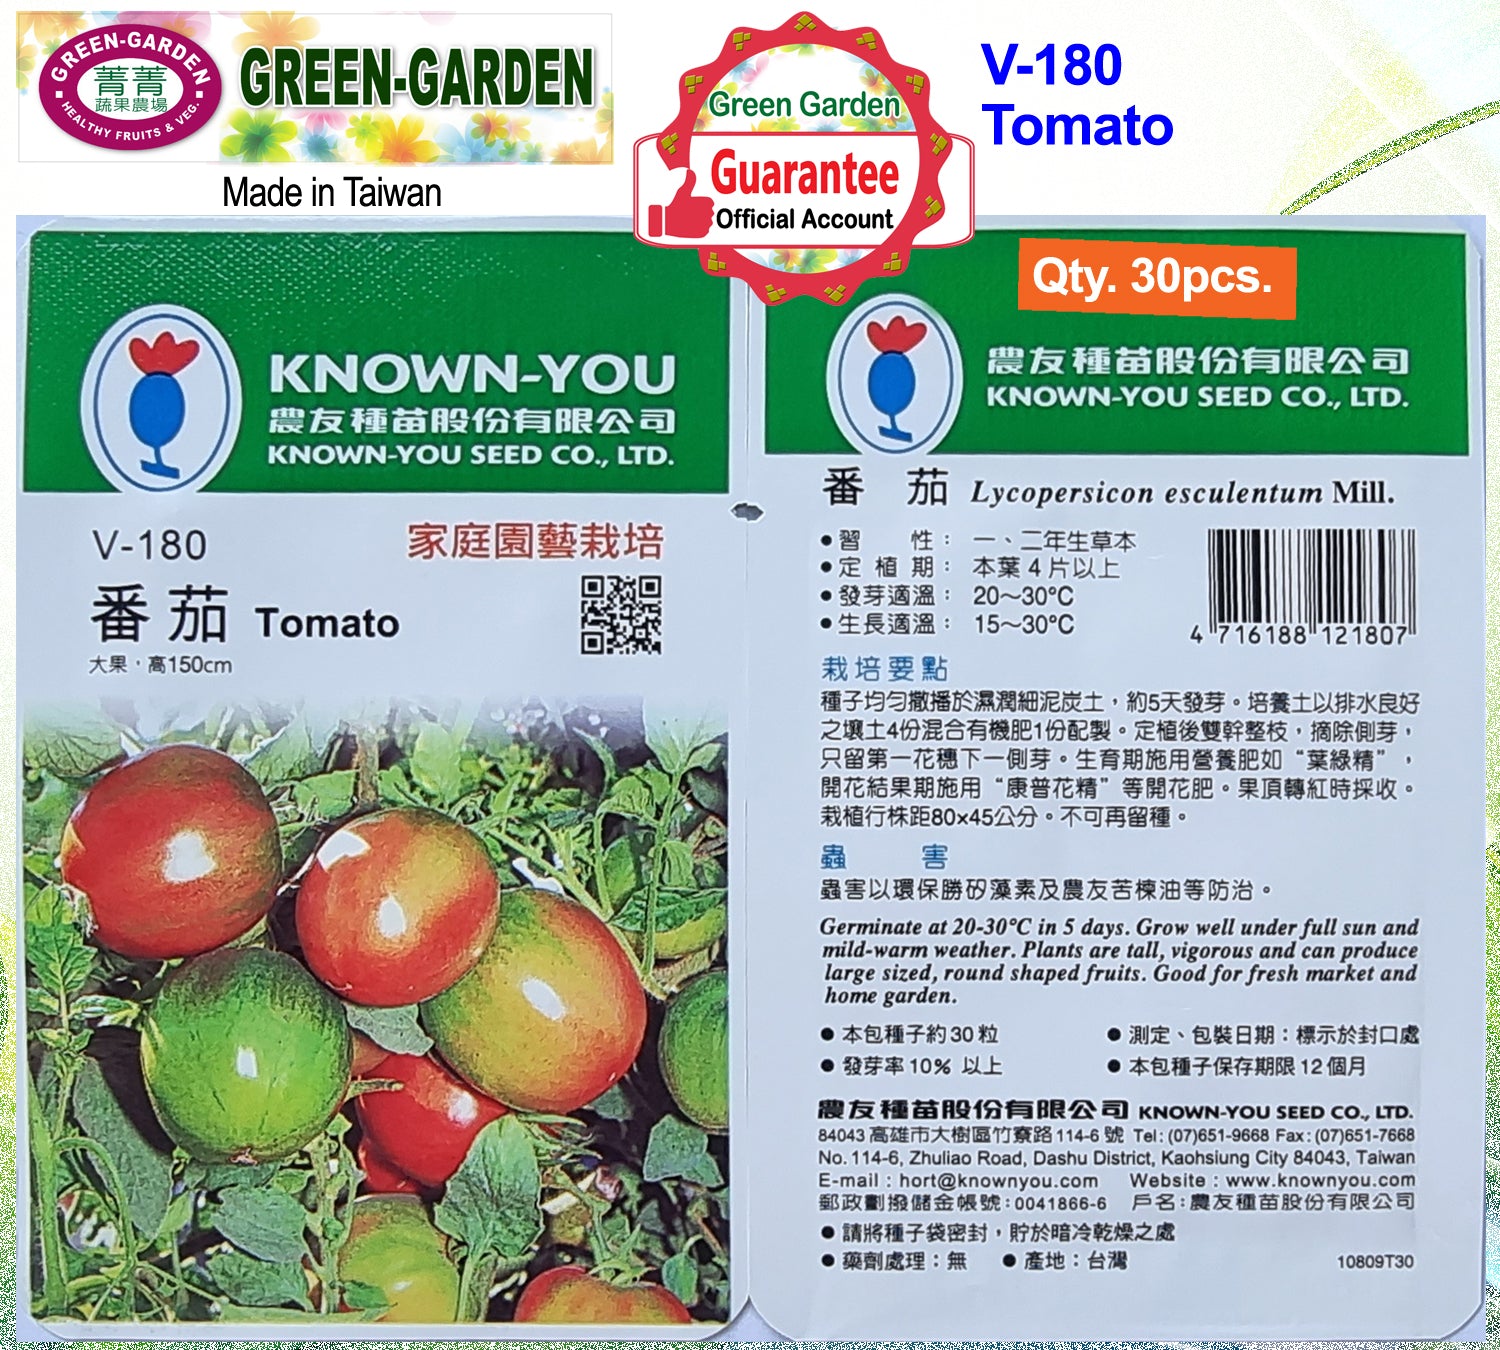 Known You Vegetable Seeds (V-180 Tomato)